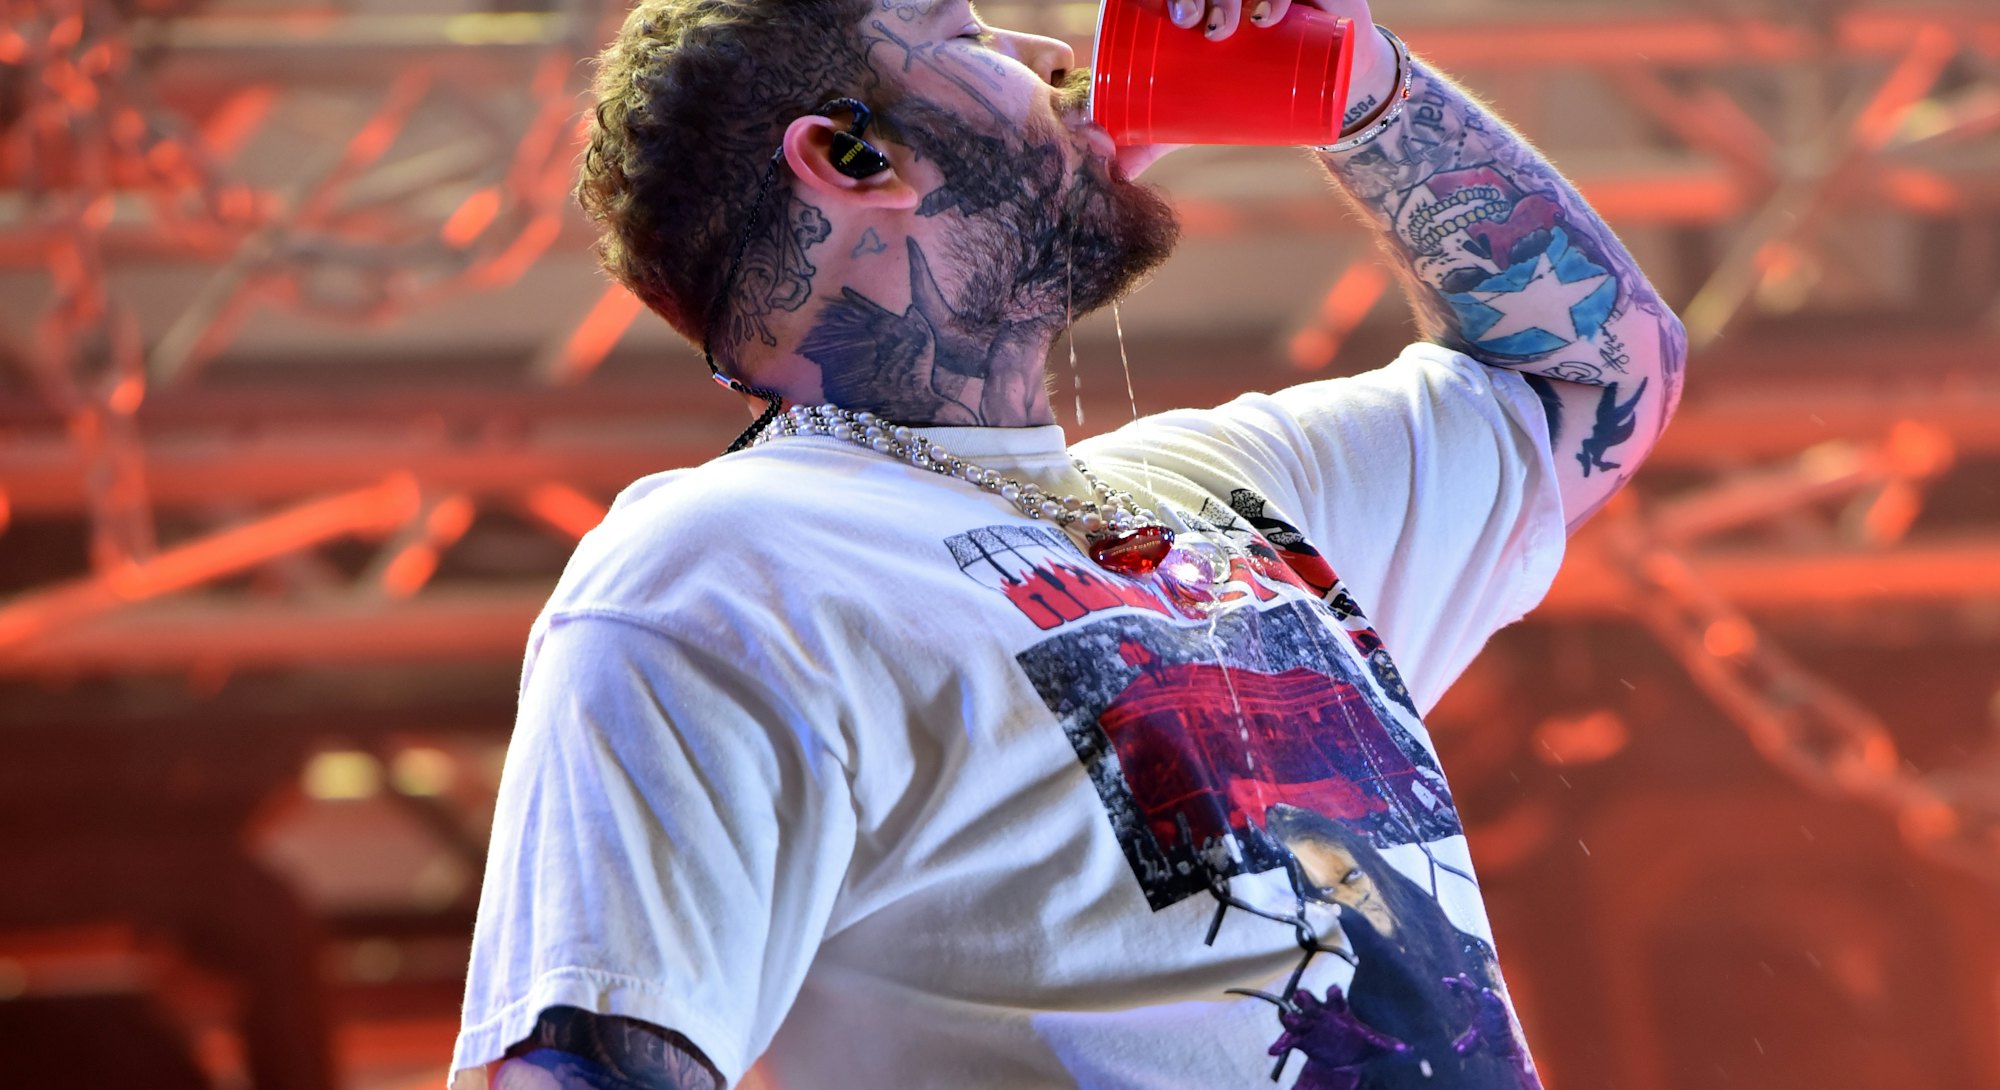 READING, ENGLAND - AUGUST 28: EDITORIAL USE ONLY Post Malone headlines the Main Stage during Day 2 o...